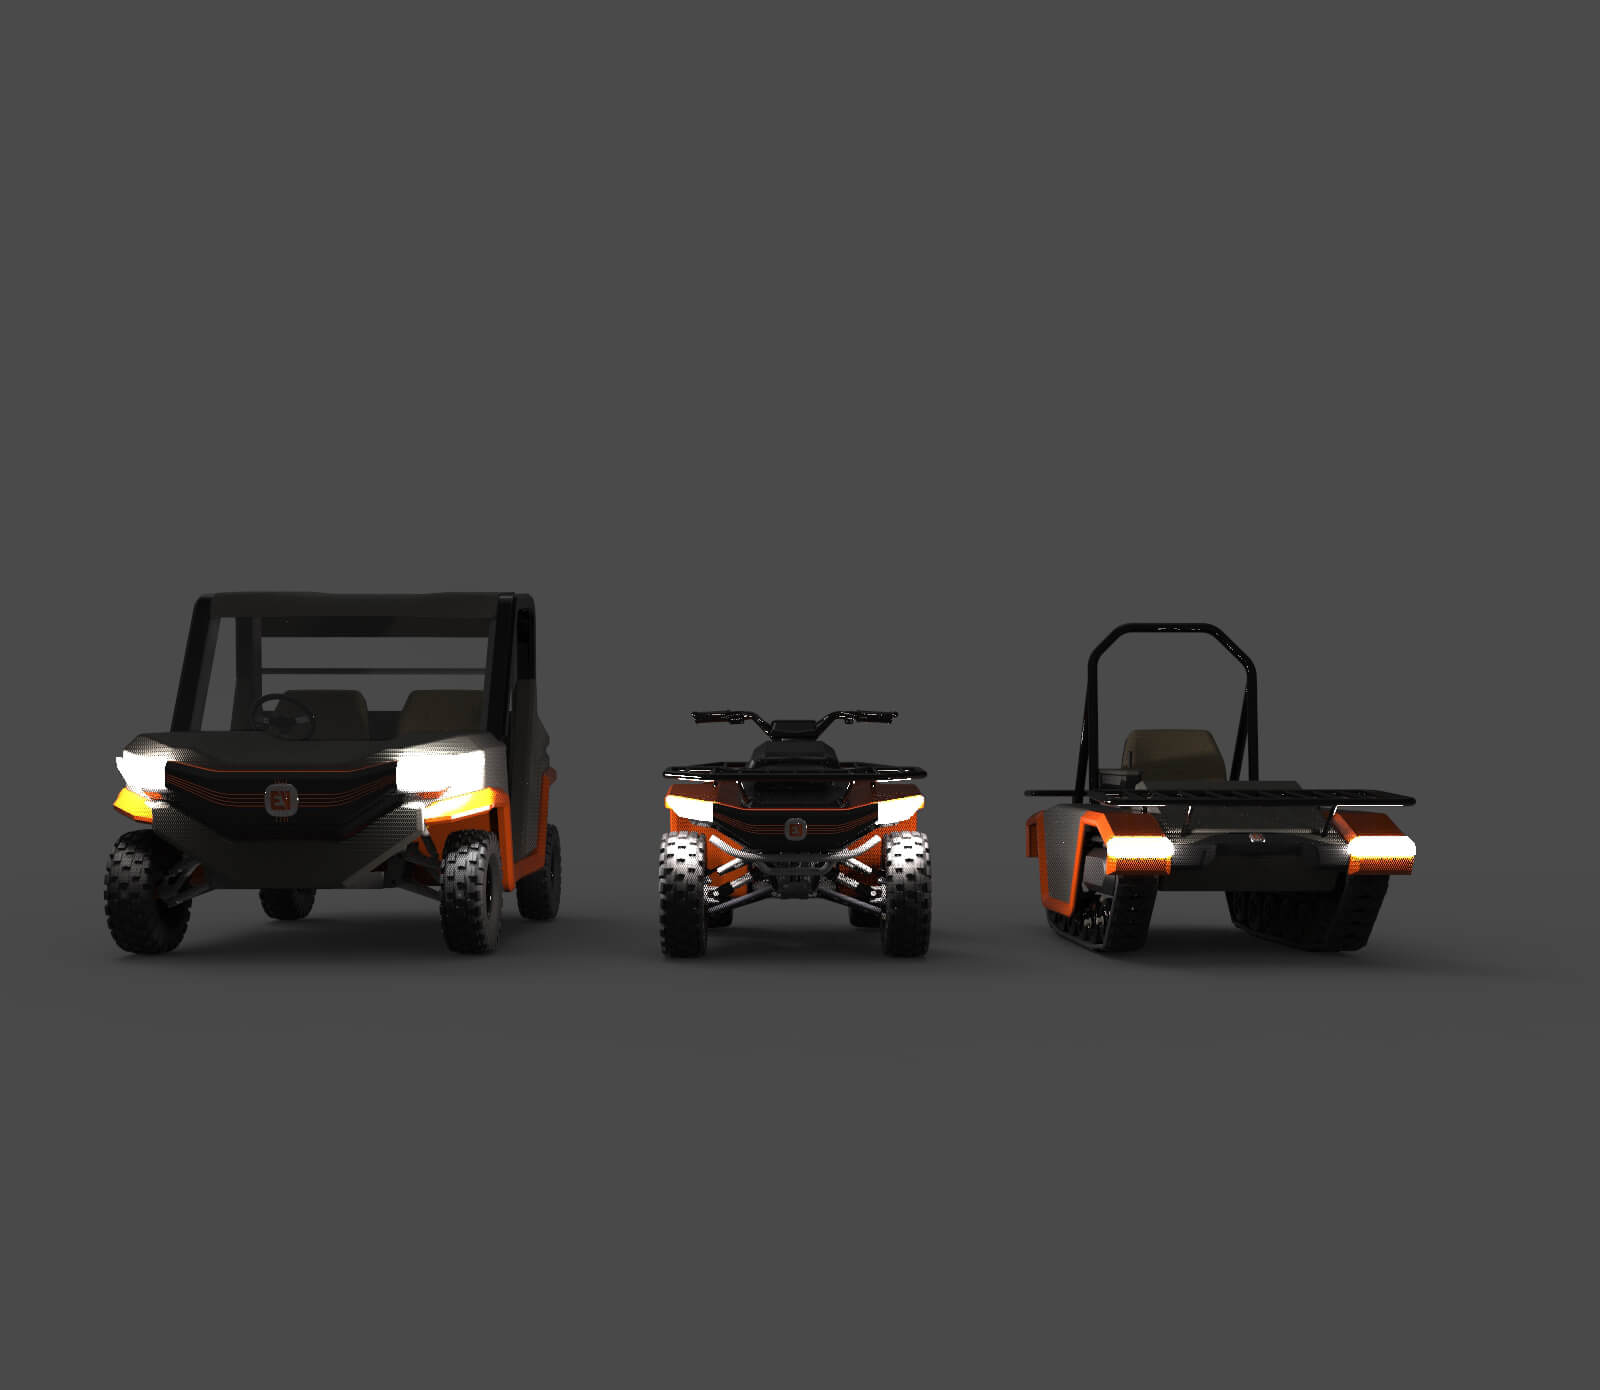 The full Pulse EV range of vehicles in a line, with their lights on